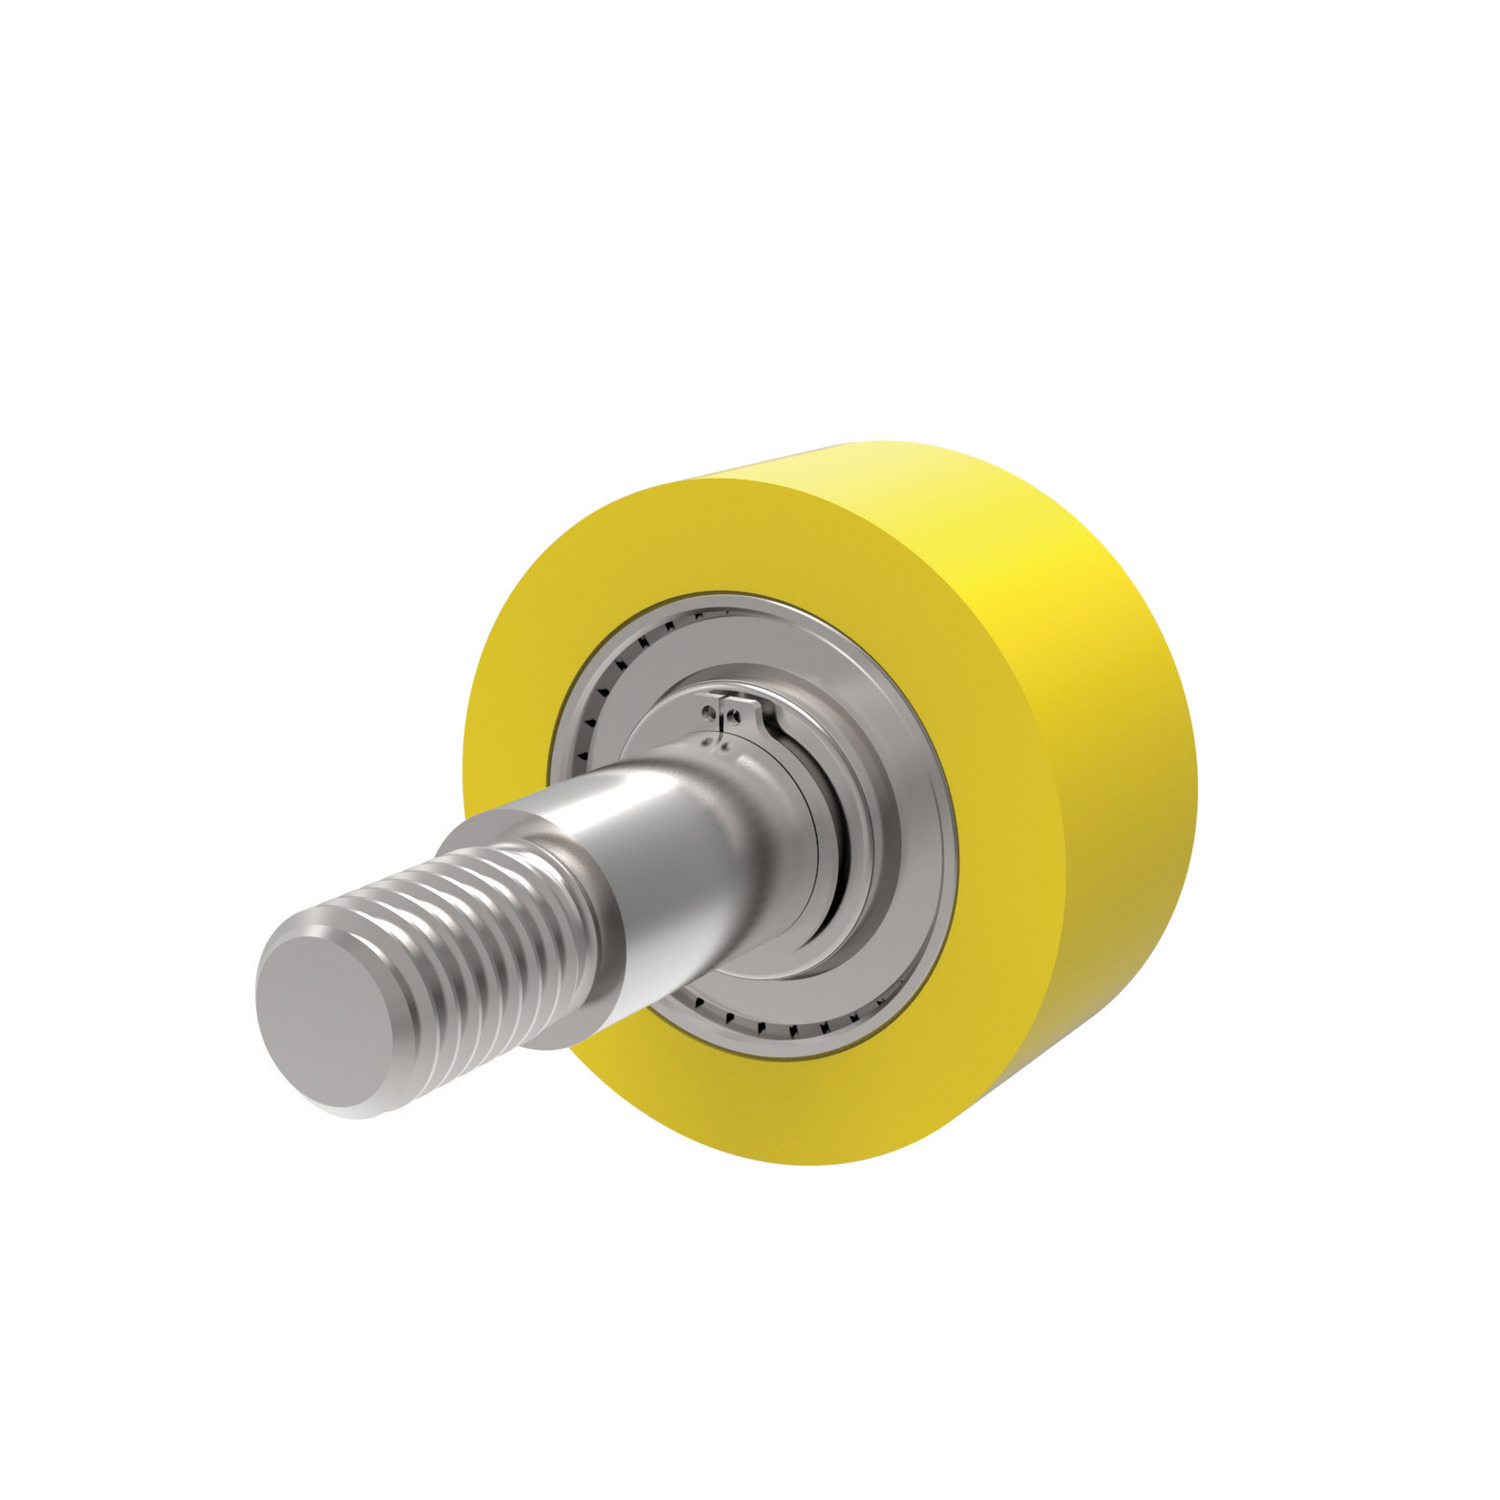 Solid Roller Solid Rollers with clutch bearings for brake left or break right applications in controlling component movement.